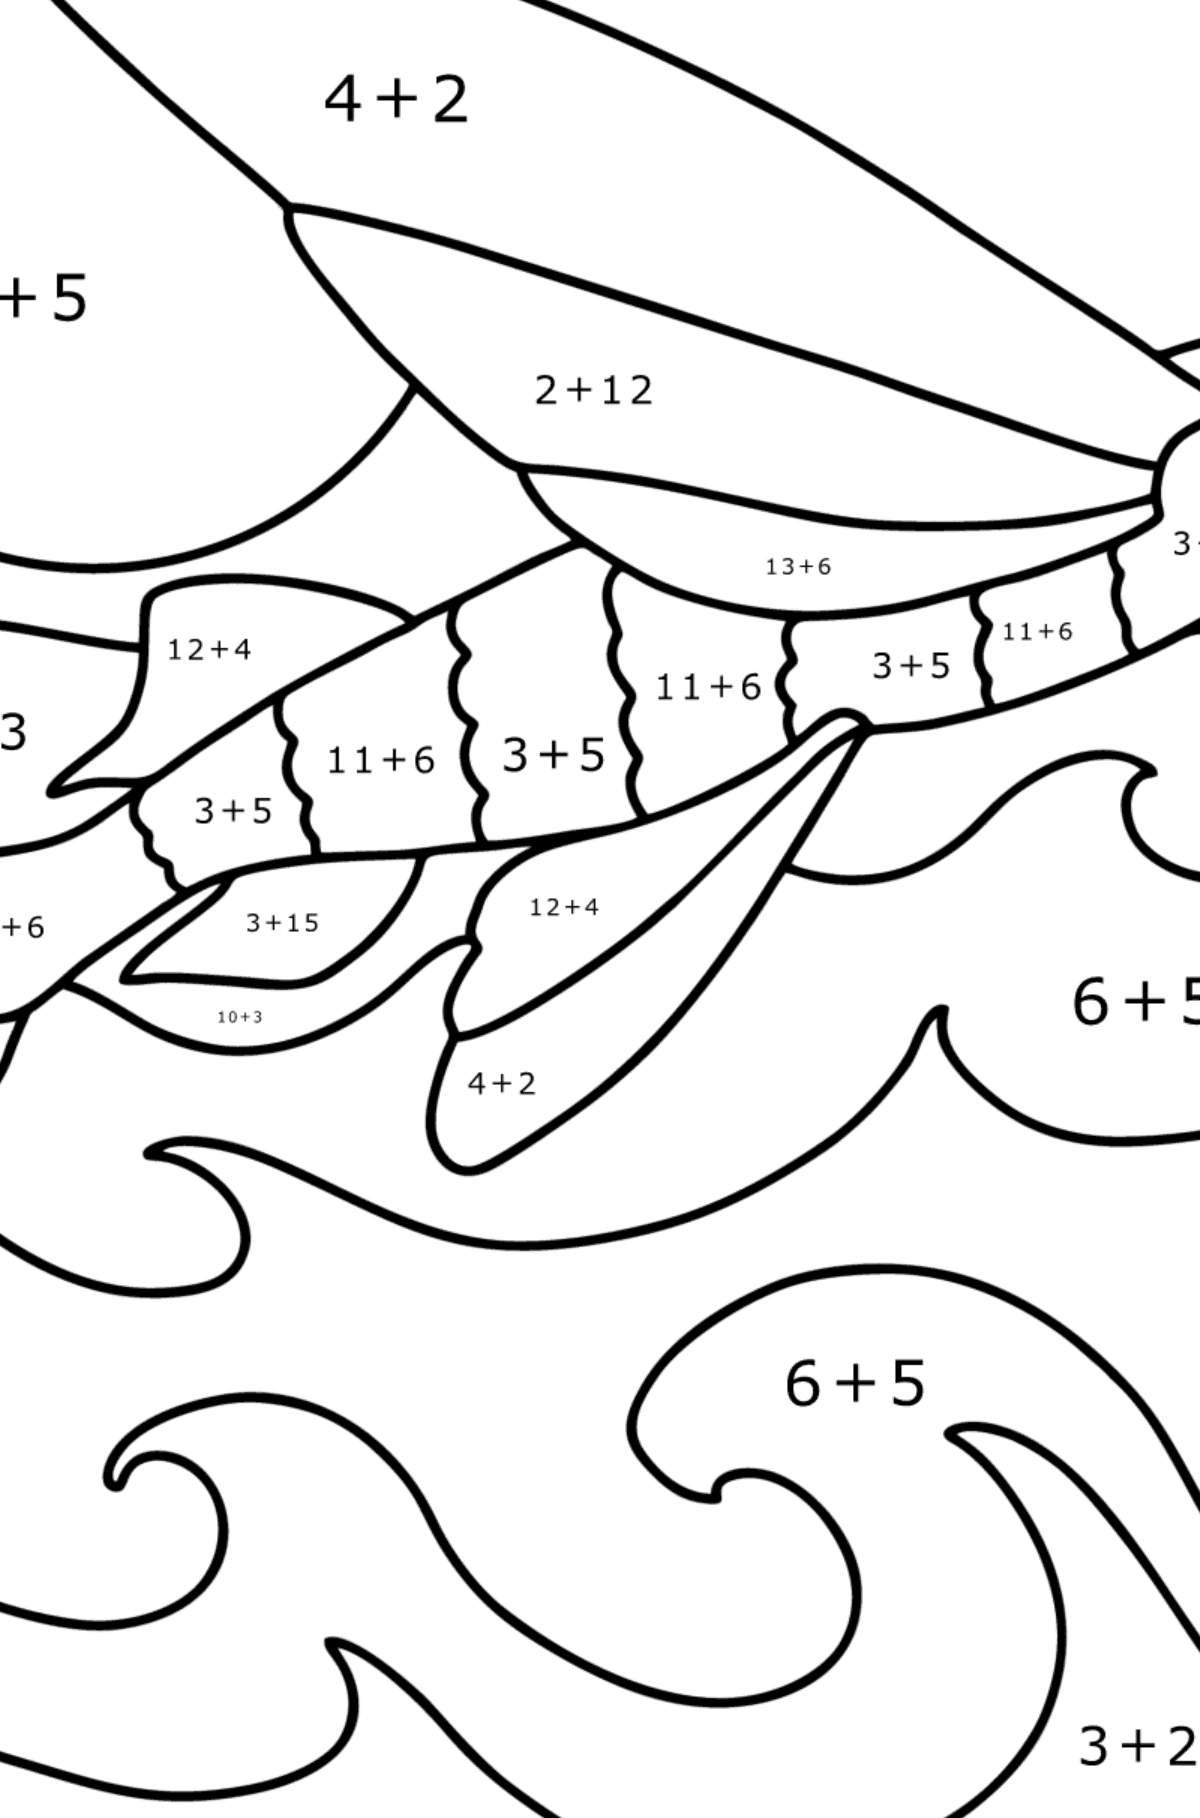 Flying fish coloring page - Math Coloring - Addition for Kids